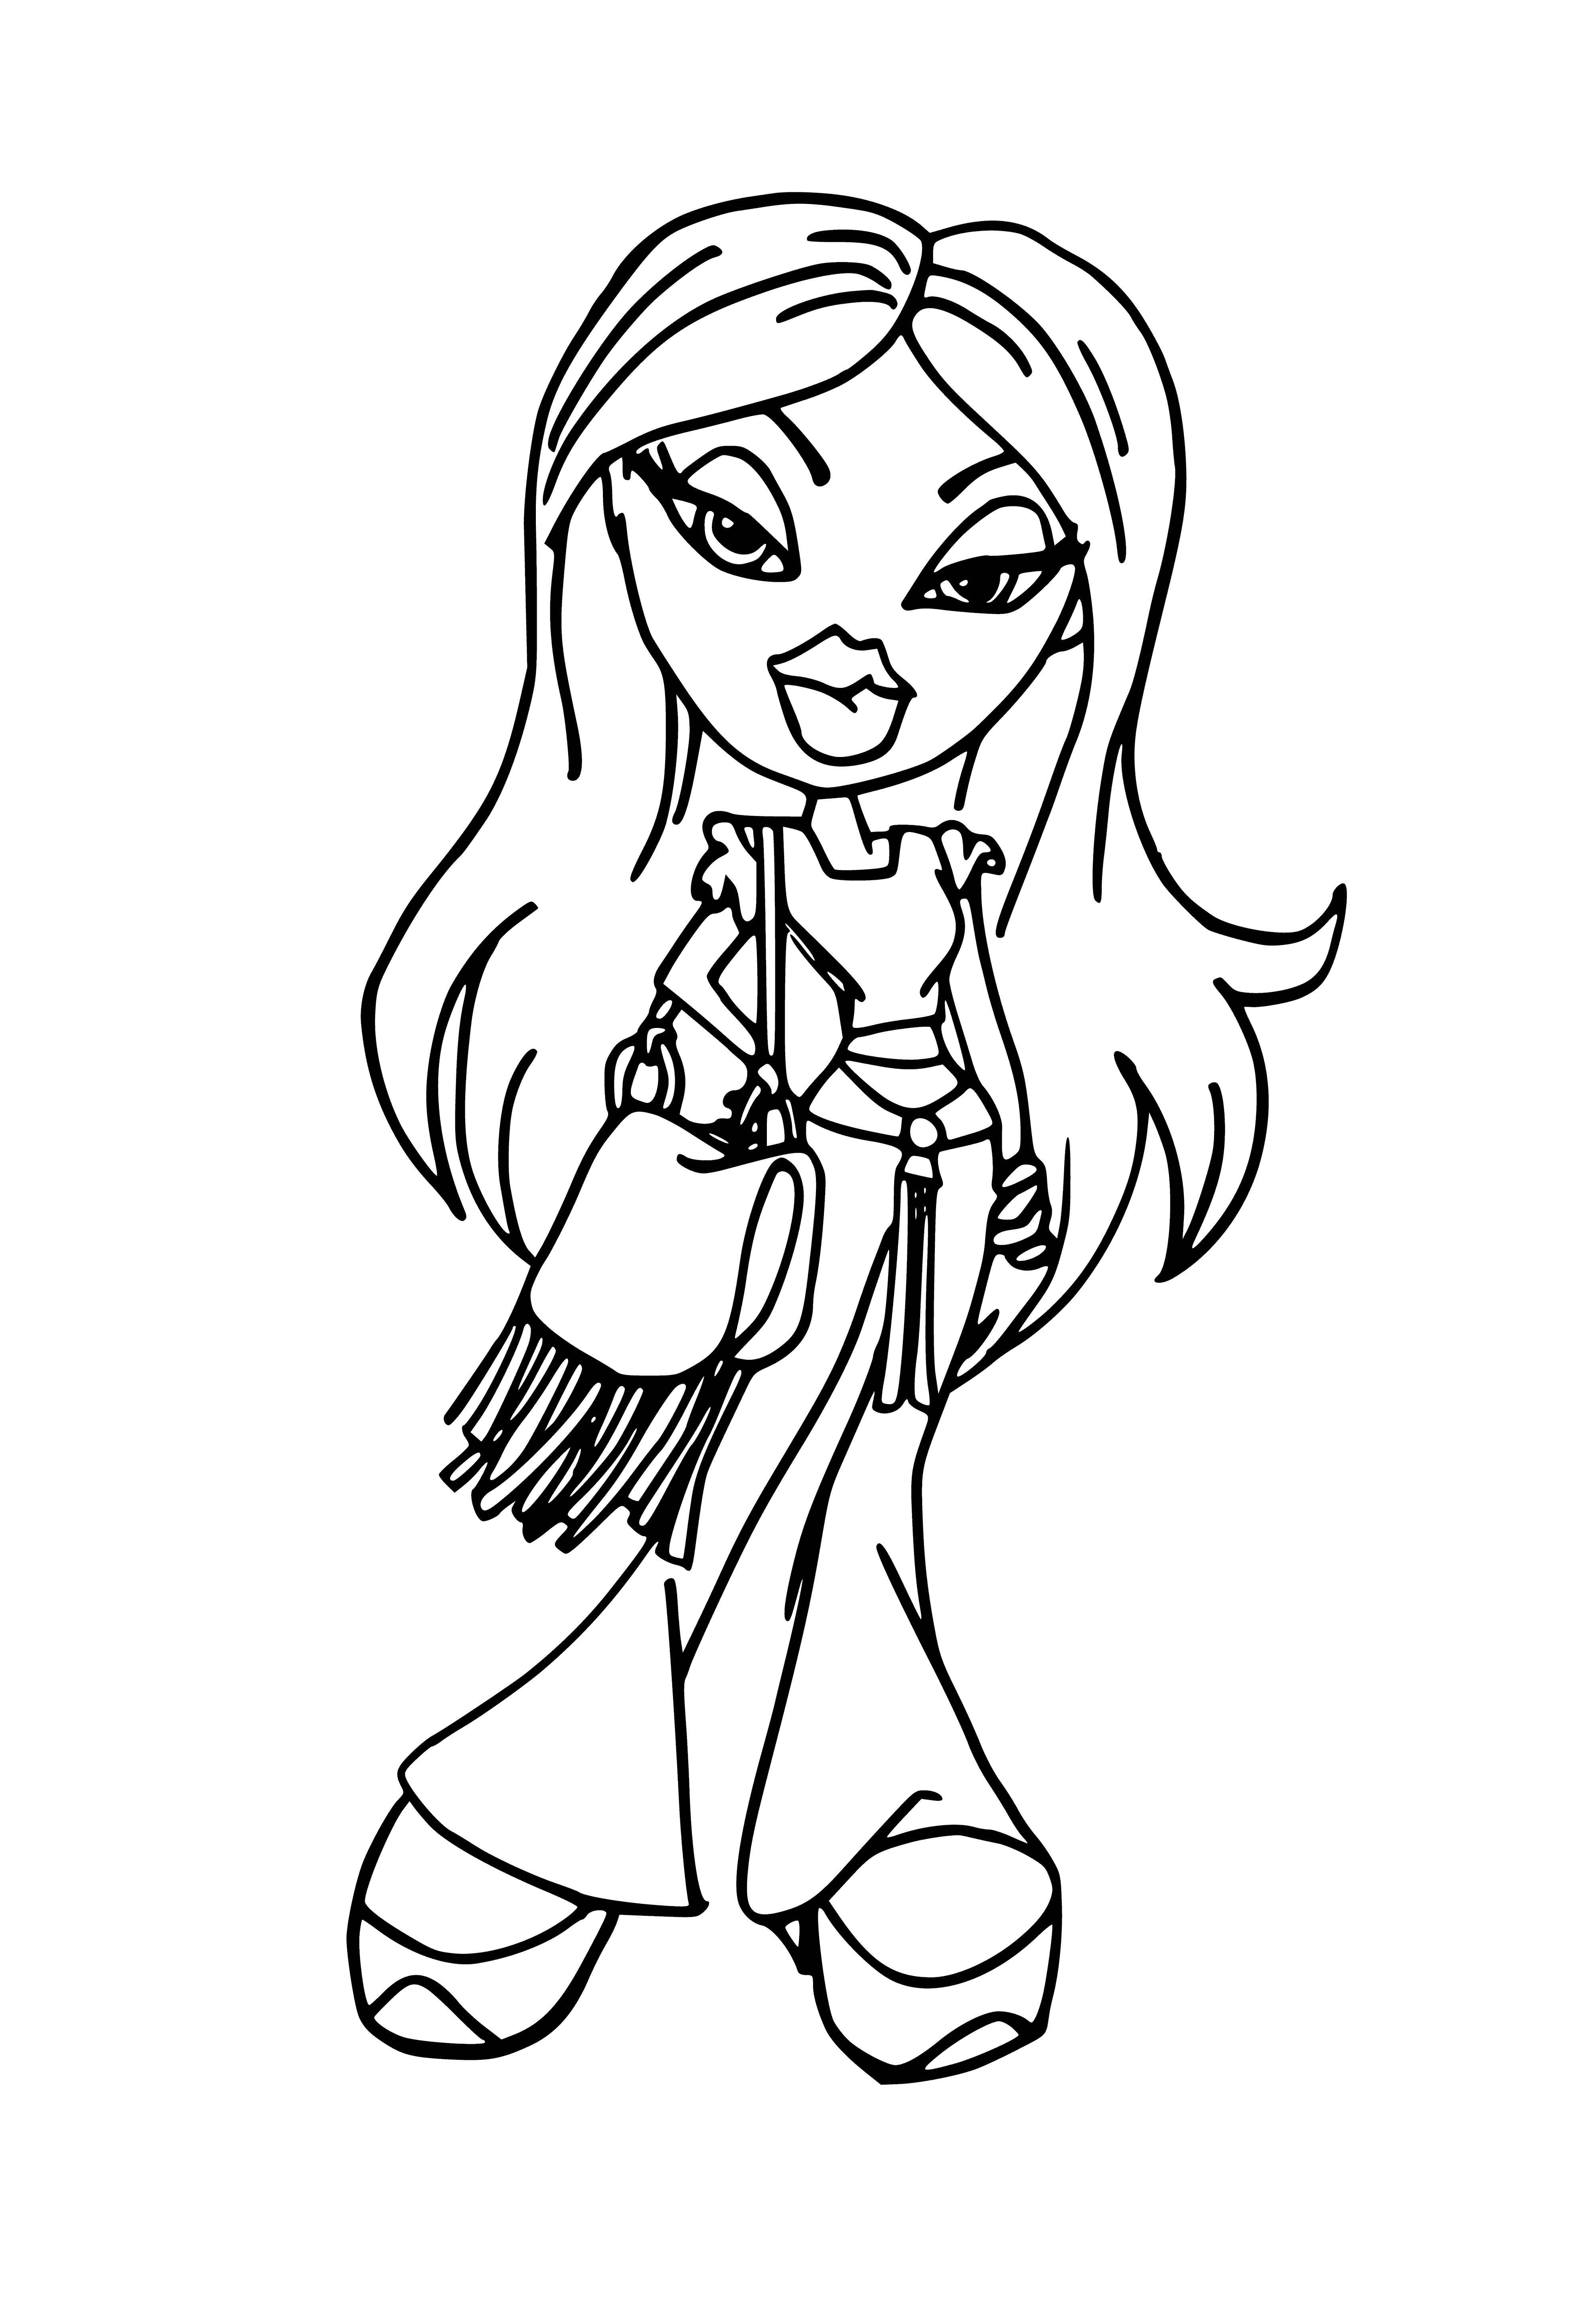 Bratz doll coloring page